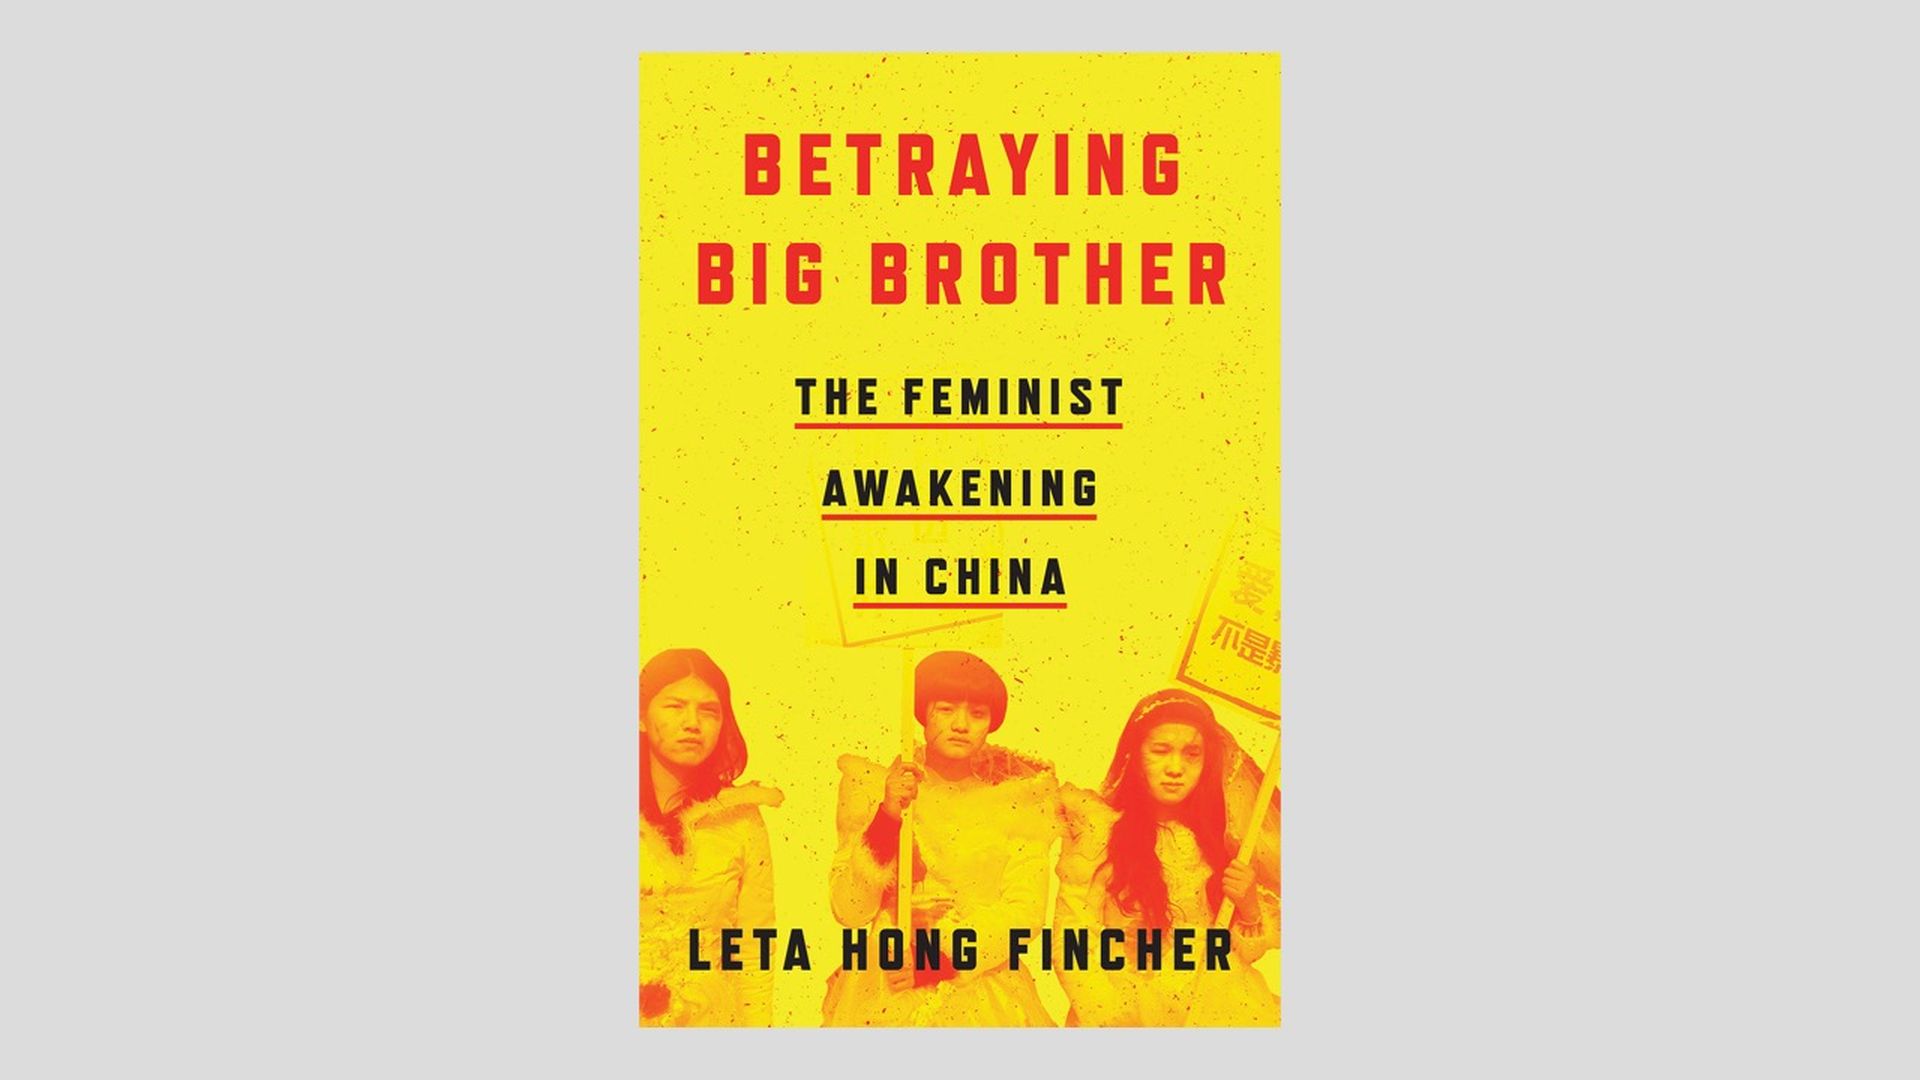 Photo of book cover "Betraying Big Brother" about China